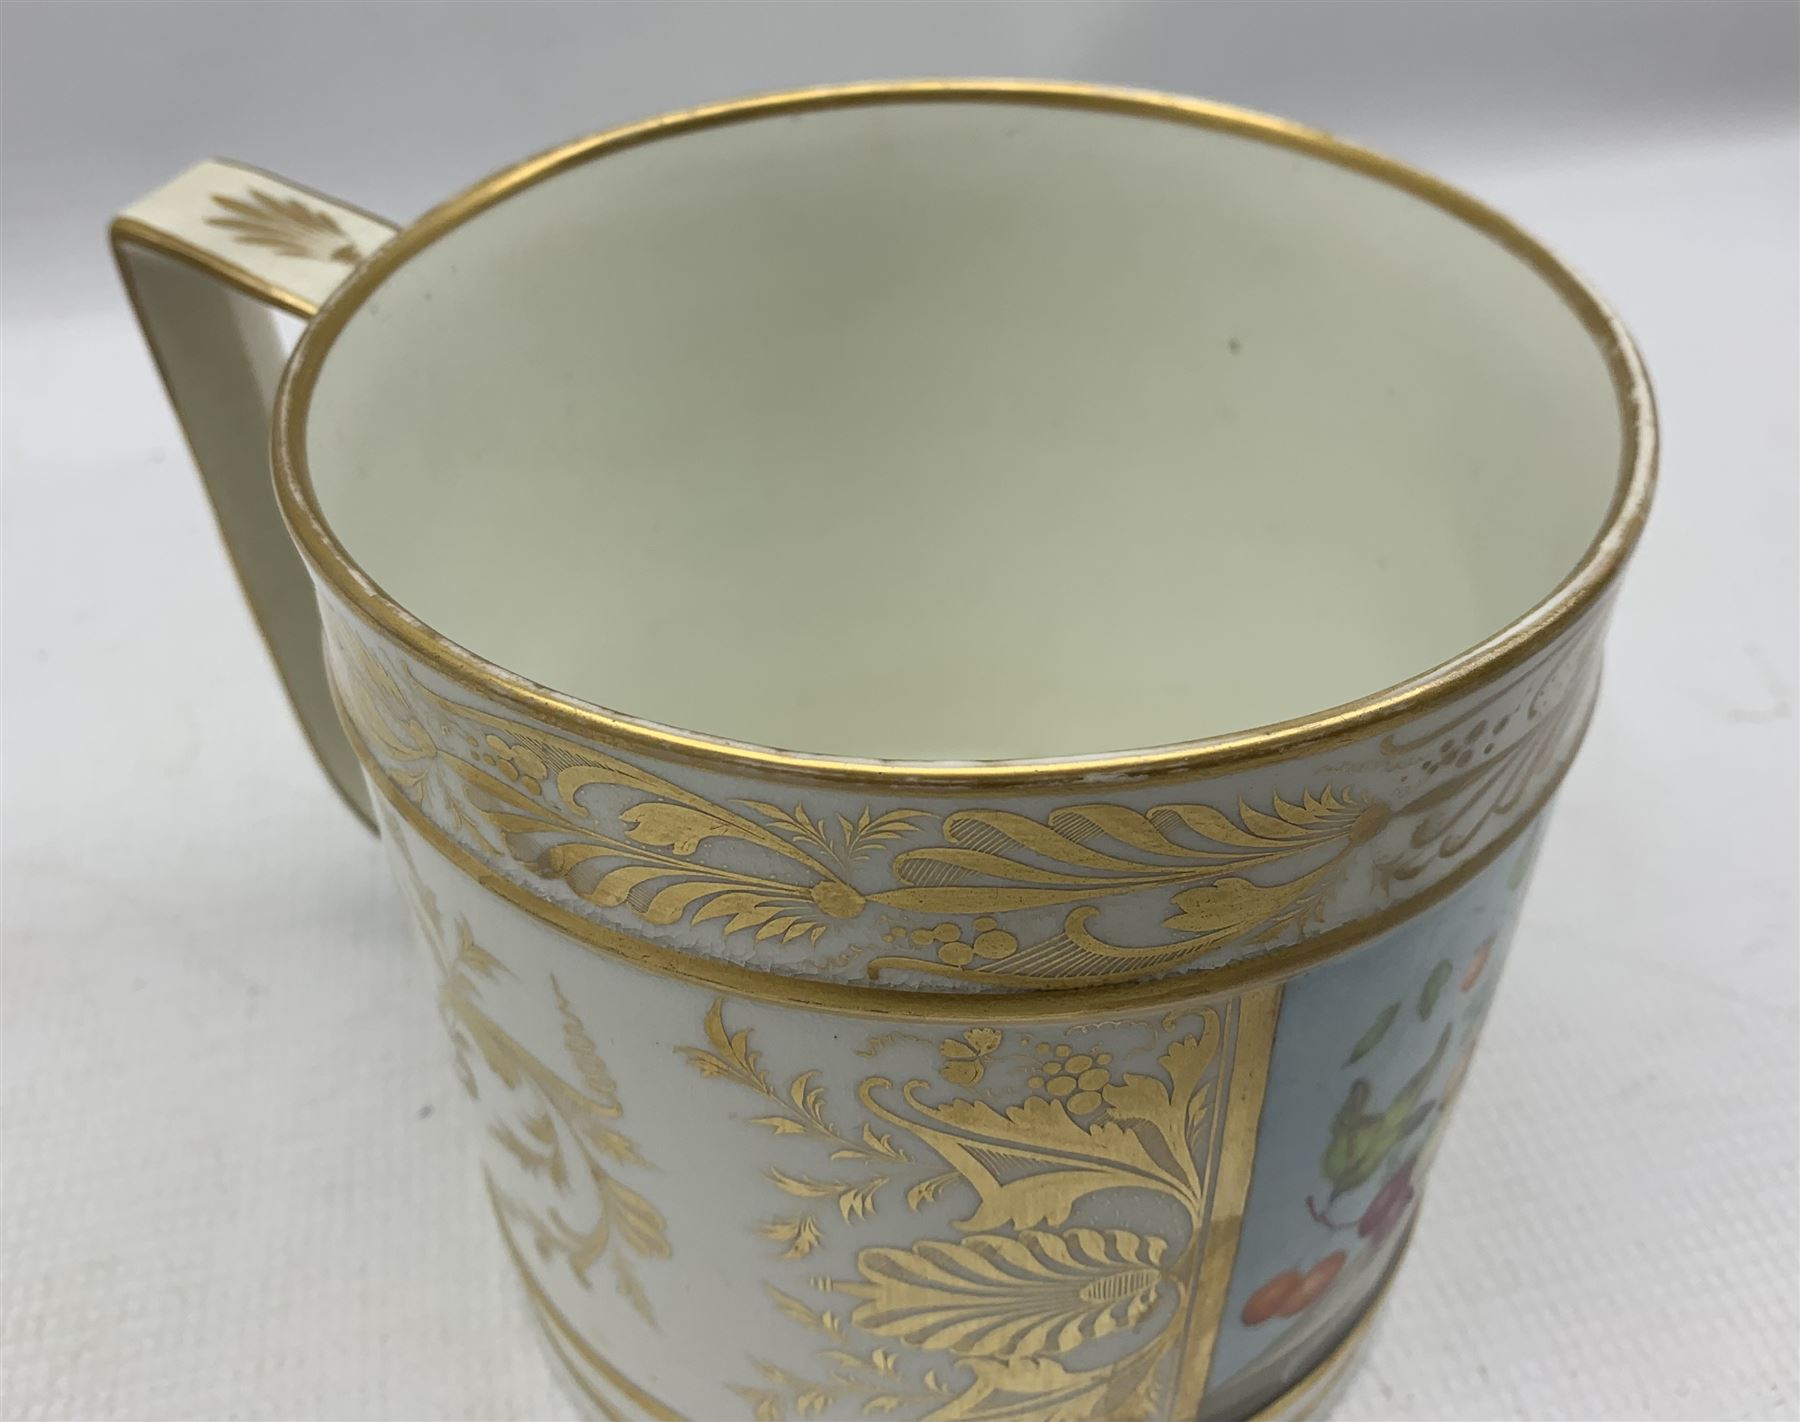 Early 19th century Derby porter mug painted with a panel of fruit with gilded scrolls and foliage an - Image 3 of 6